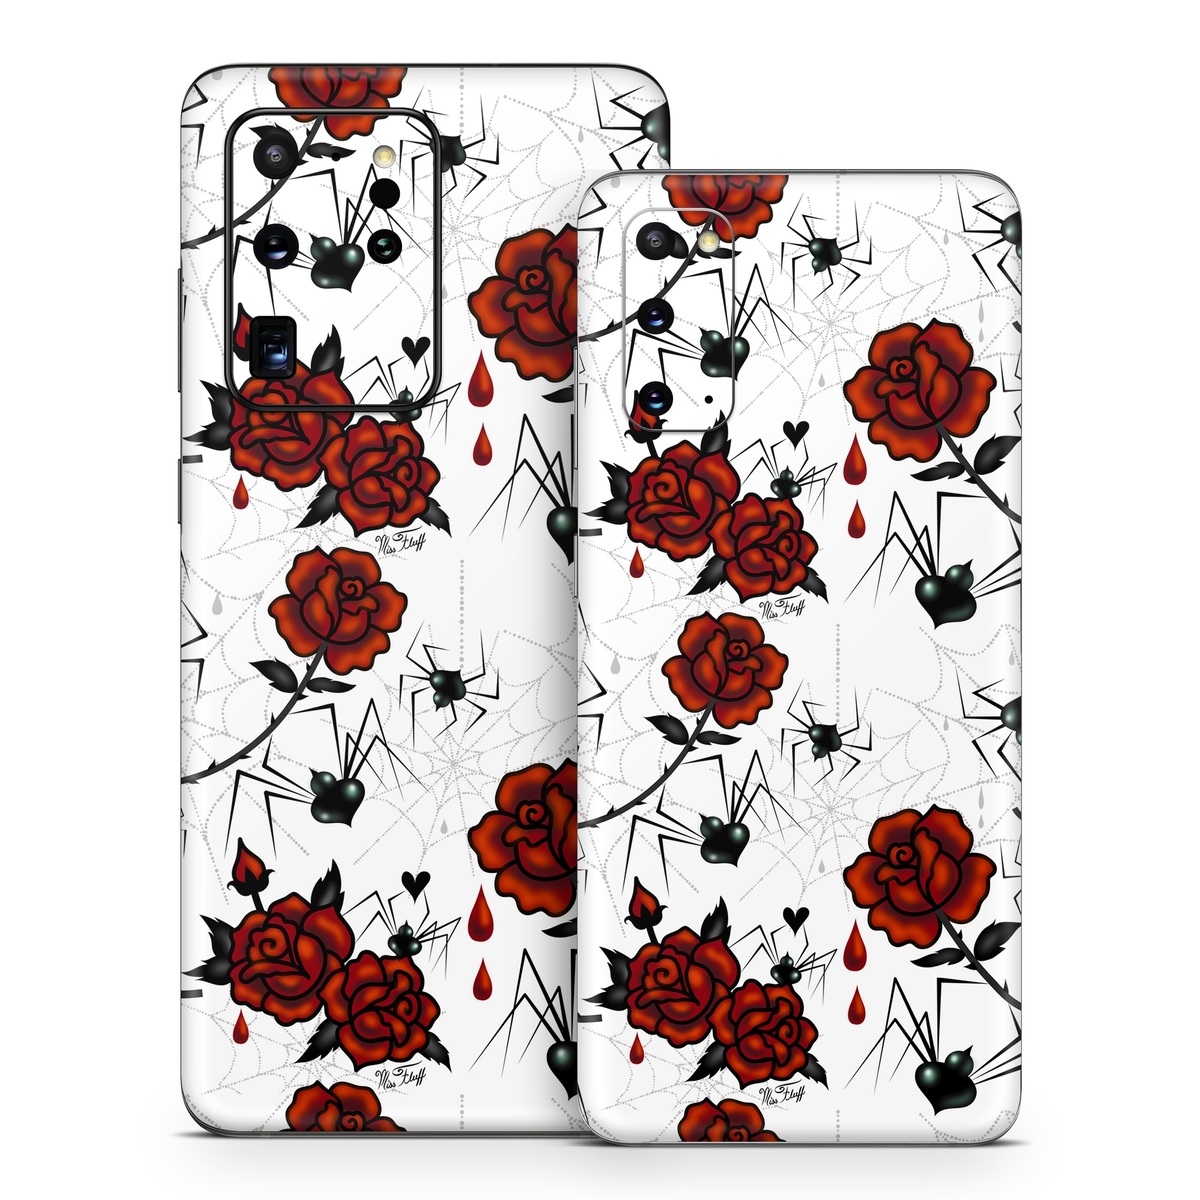 Samsung Galaxy S20 Series Skin design of Red, Pattern, Flower, Plant, Design, Floral design, Petal, Coquelicot, Wildflower, Rose, with black, white, red colors